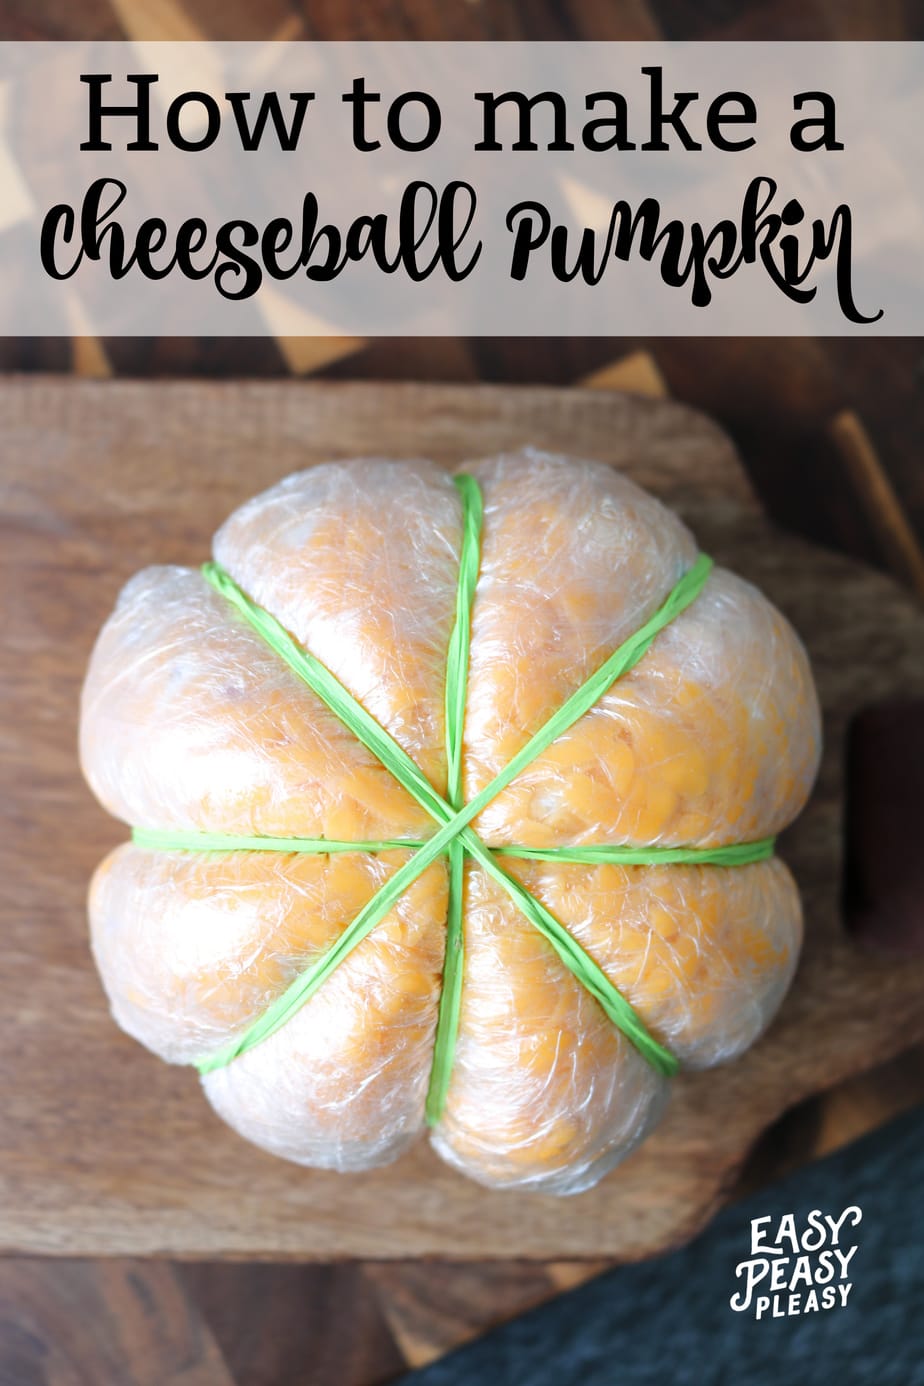 How to make a Cheeseball Pumpkin using only 4 ingredients perfect for Thanksgiving and Halloween. #cheeseball #cheeseballpumpkin #thanksgivingcheeseball #halloweencheeseball